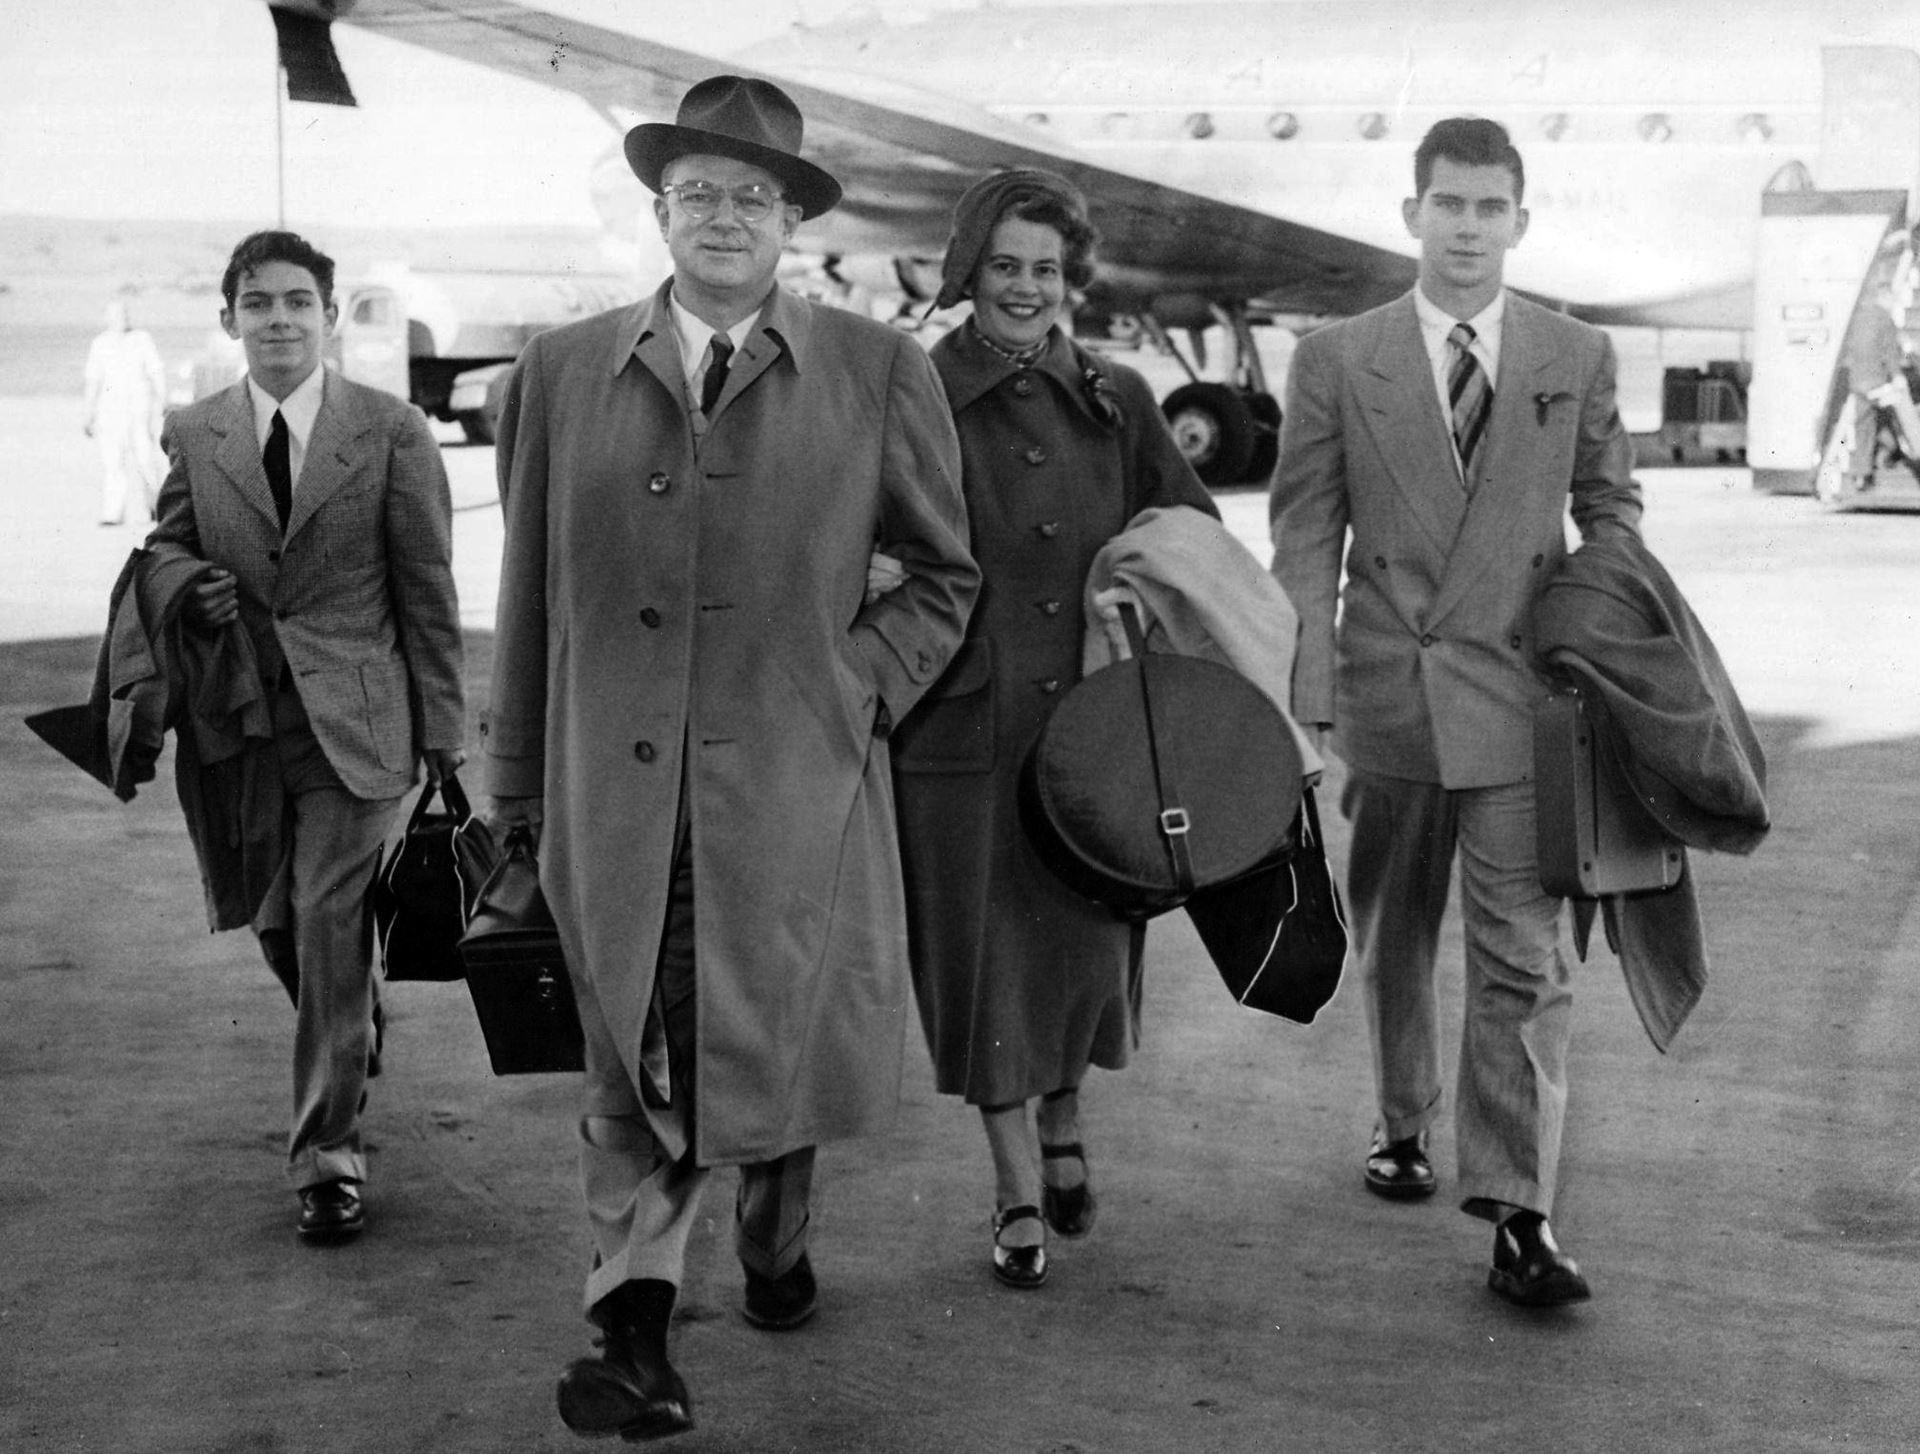 The Bedell family arrived in Sydney in 1950 Left to right: Jeff (son), Clyde, Florence (wife), and Barry (son)